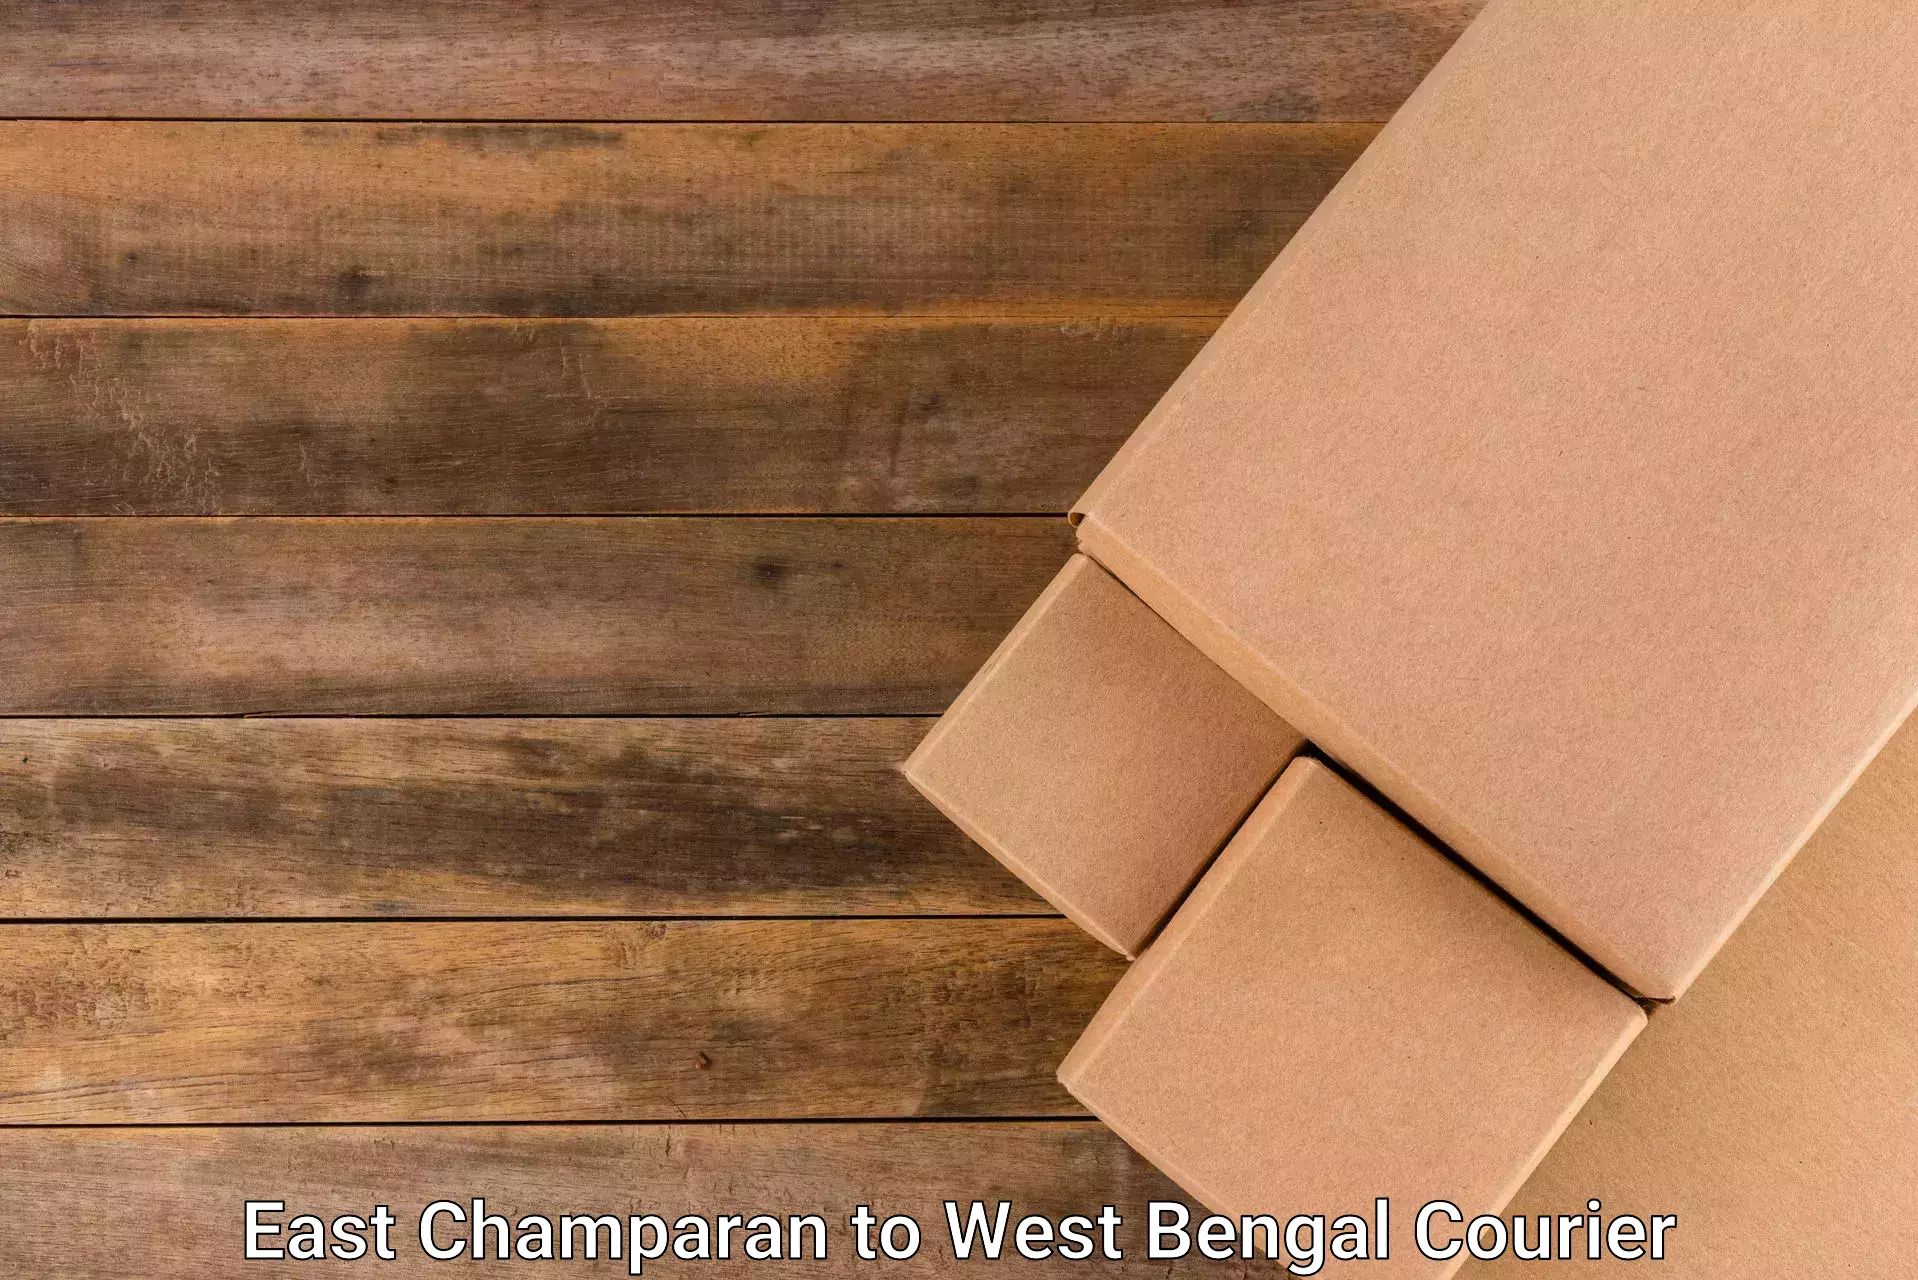 Corporate courier solutions East Champaran to Manglamaro